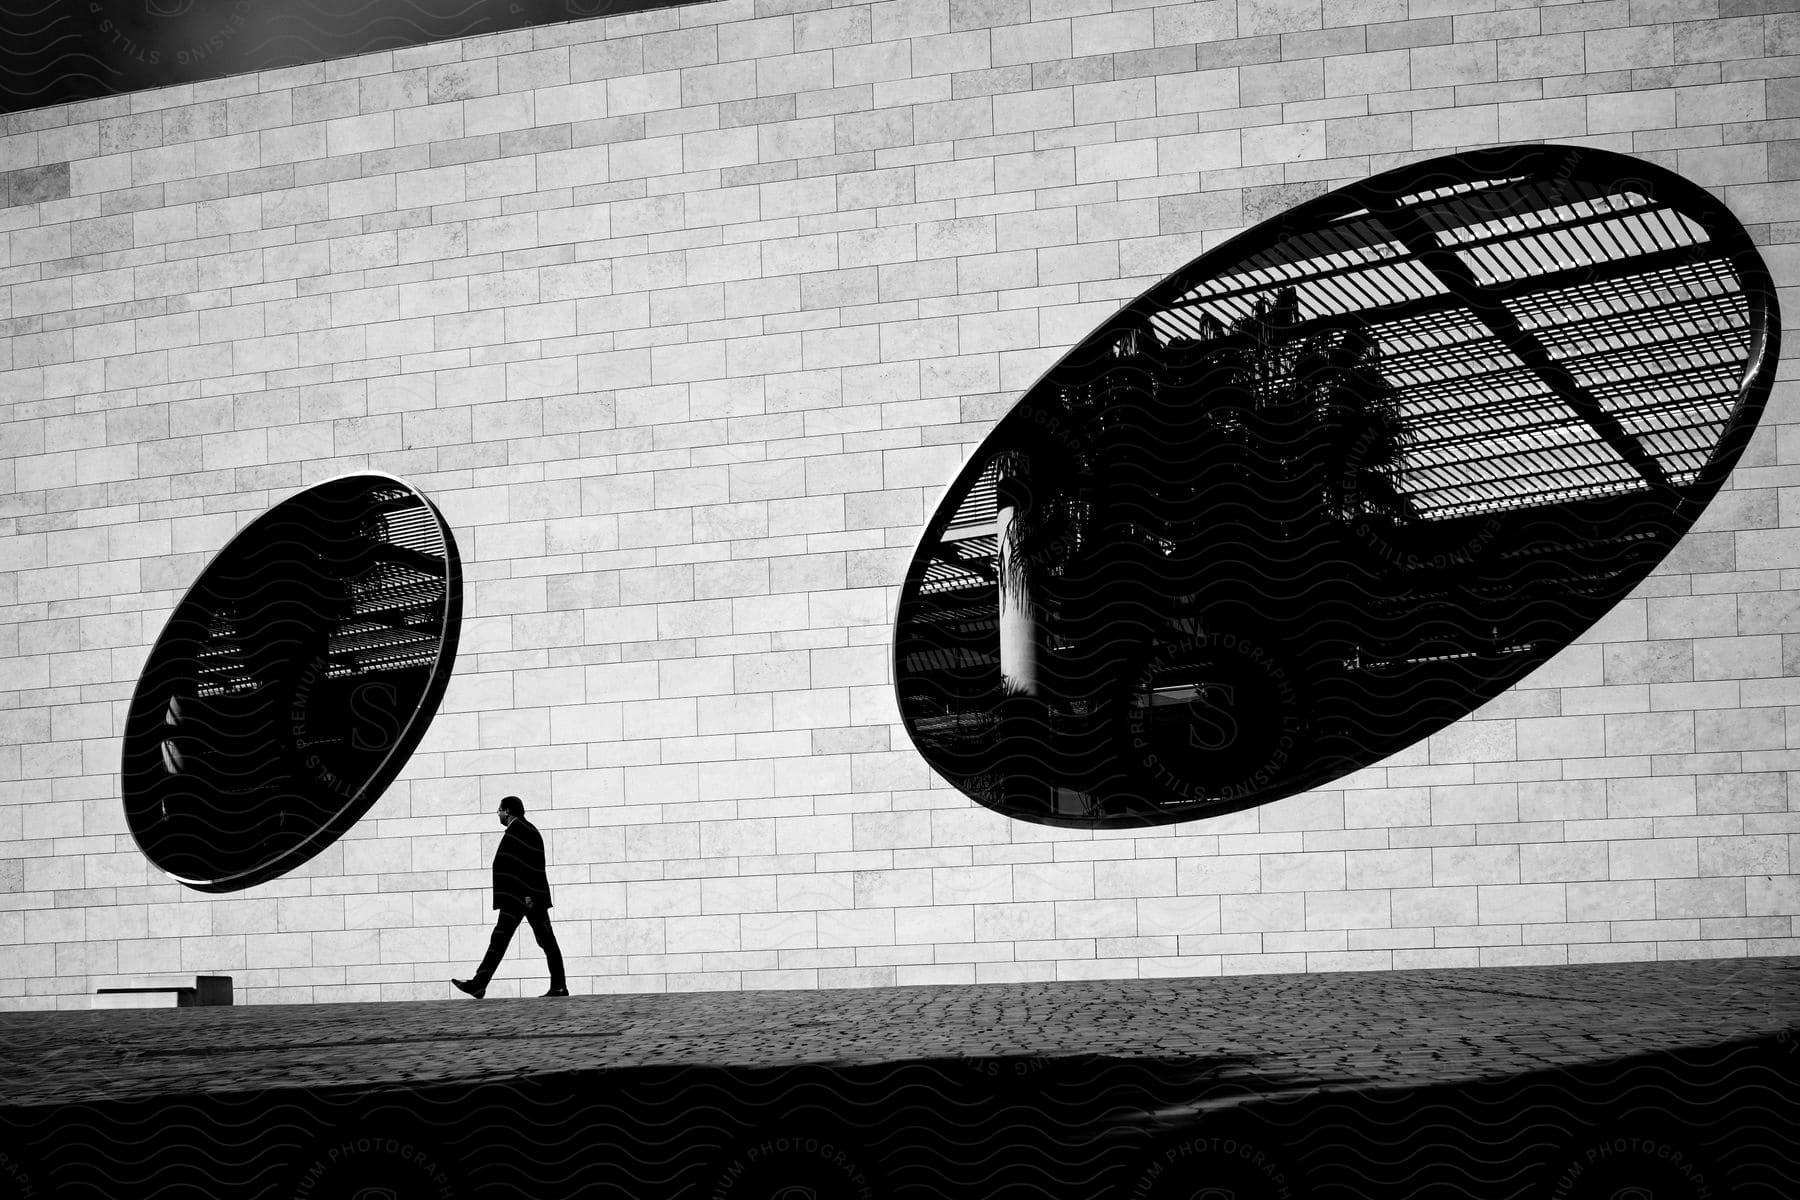 A man walking near a white brick wall with two huge oval windows in black and white tones